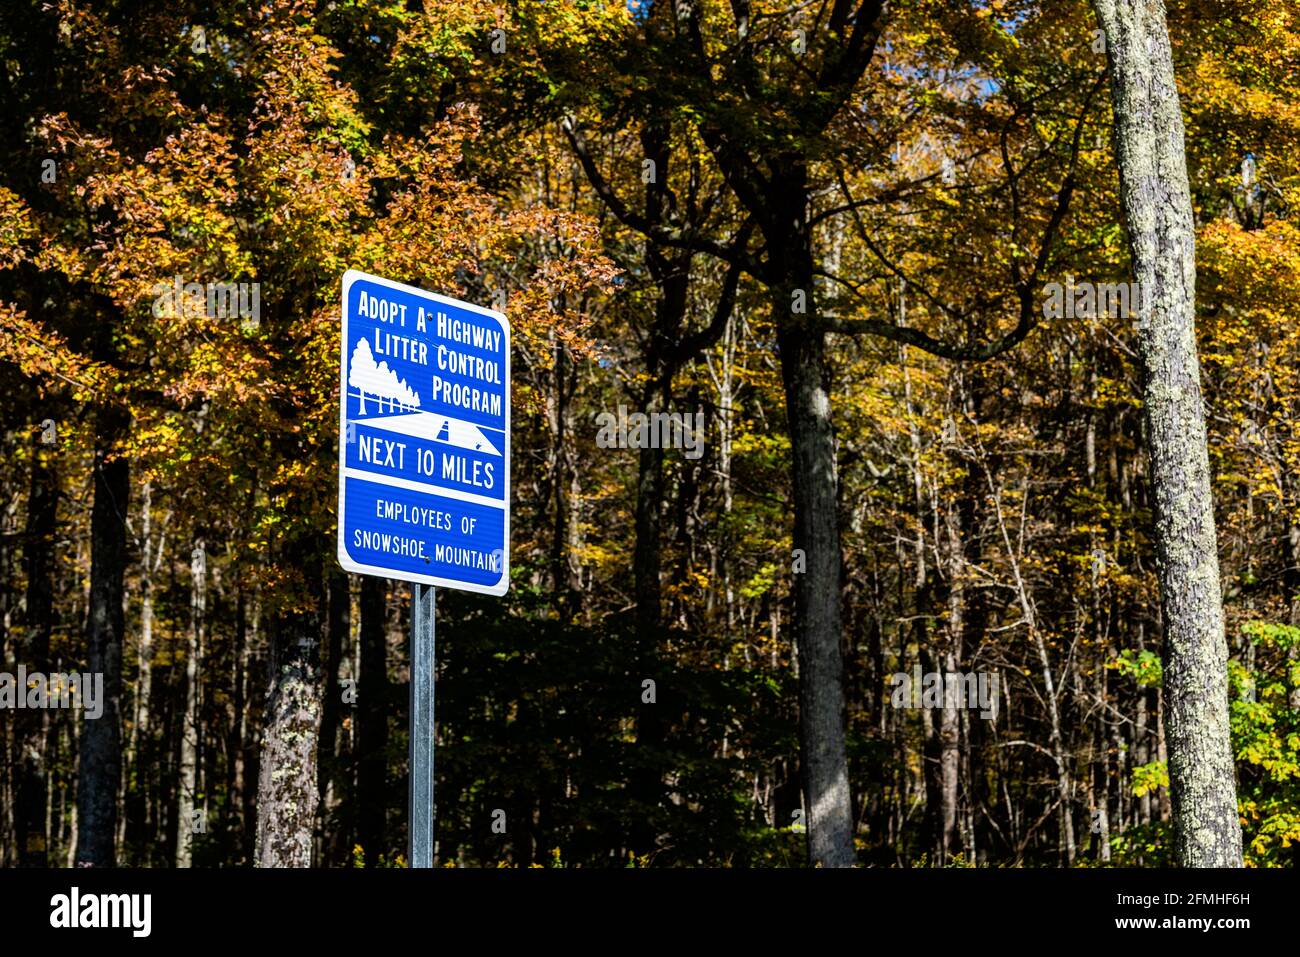 Snowshoe, USA - October 6, 2020: Adopt a highway litter control program sign for next 10 miles with Employees of Snowshoe mountain as sponsor in West Stock Photo